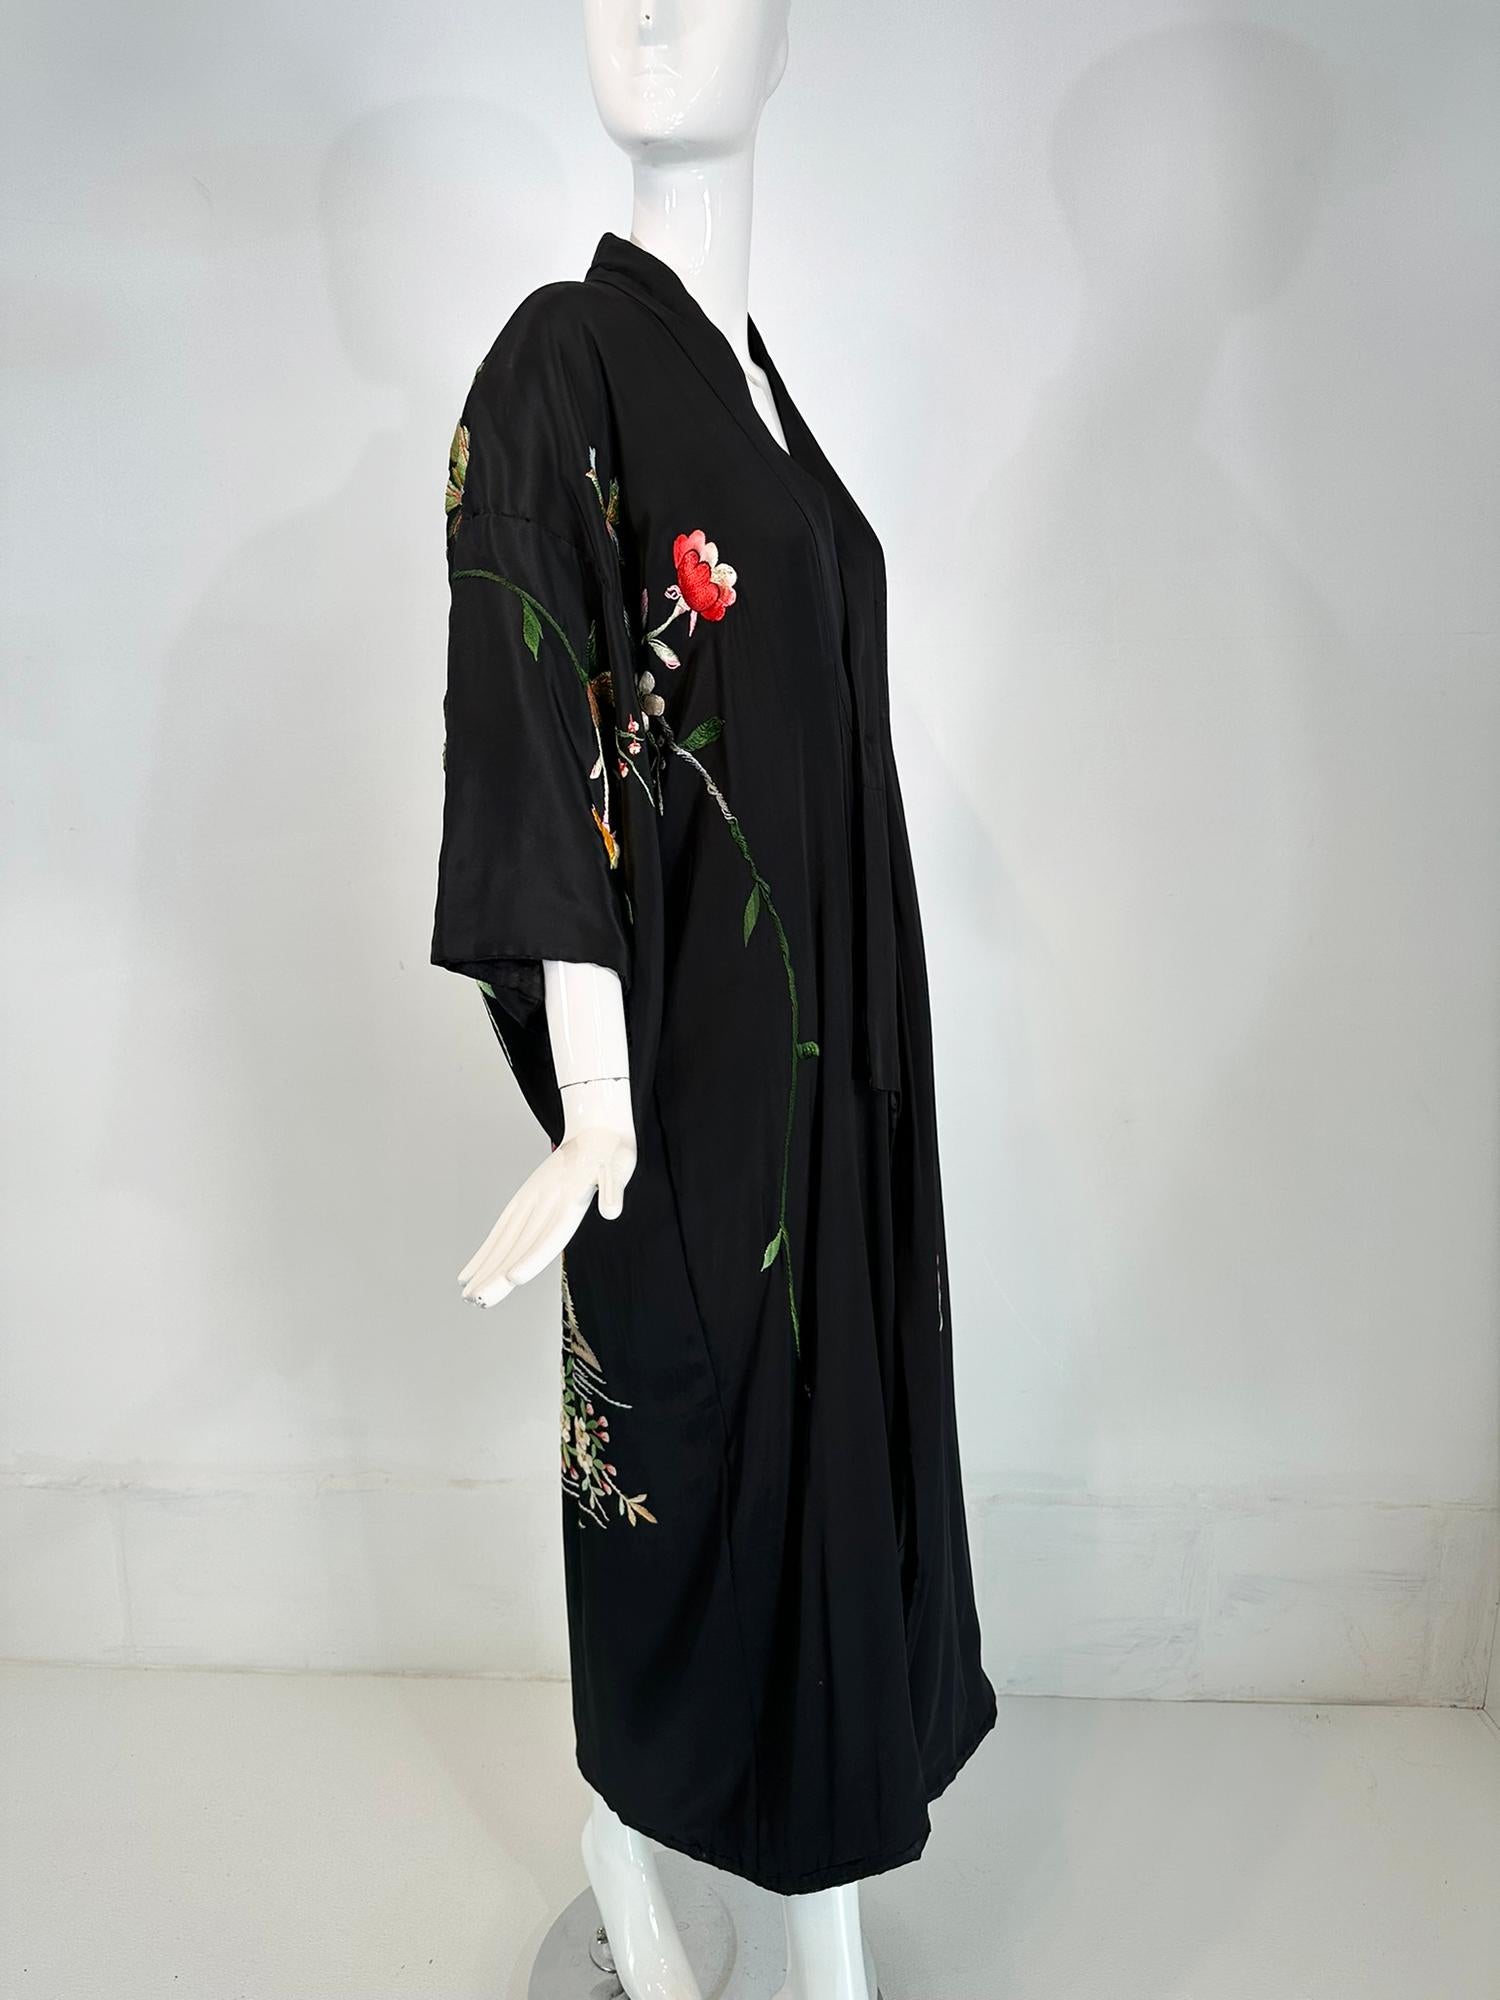 Vintage Black Rayon Heavily Floral Embroidered Kimono Robe 1930s-40s For Sale 9